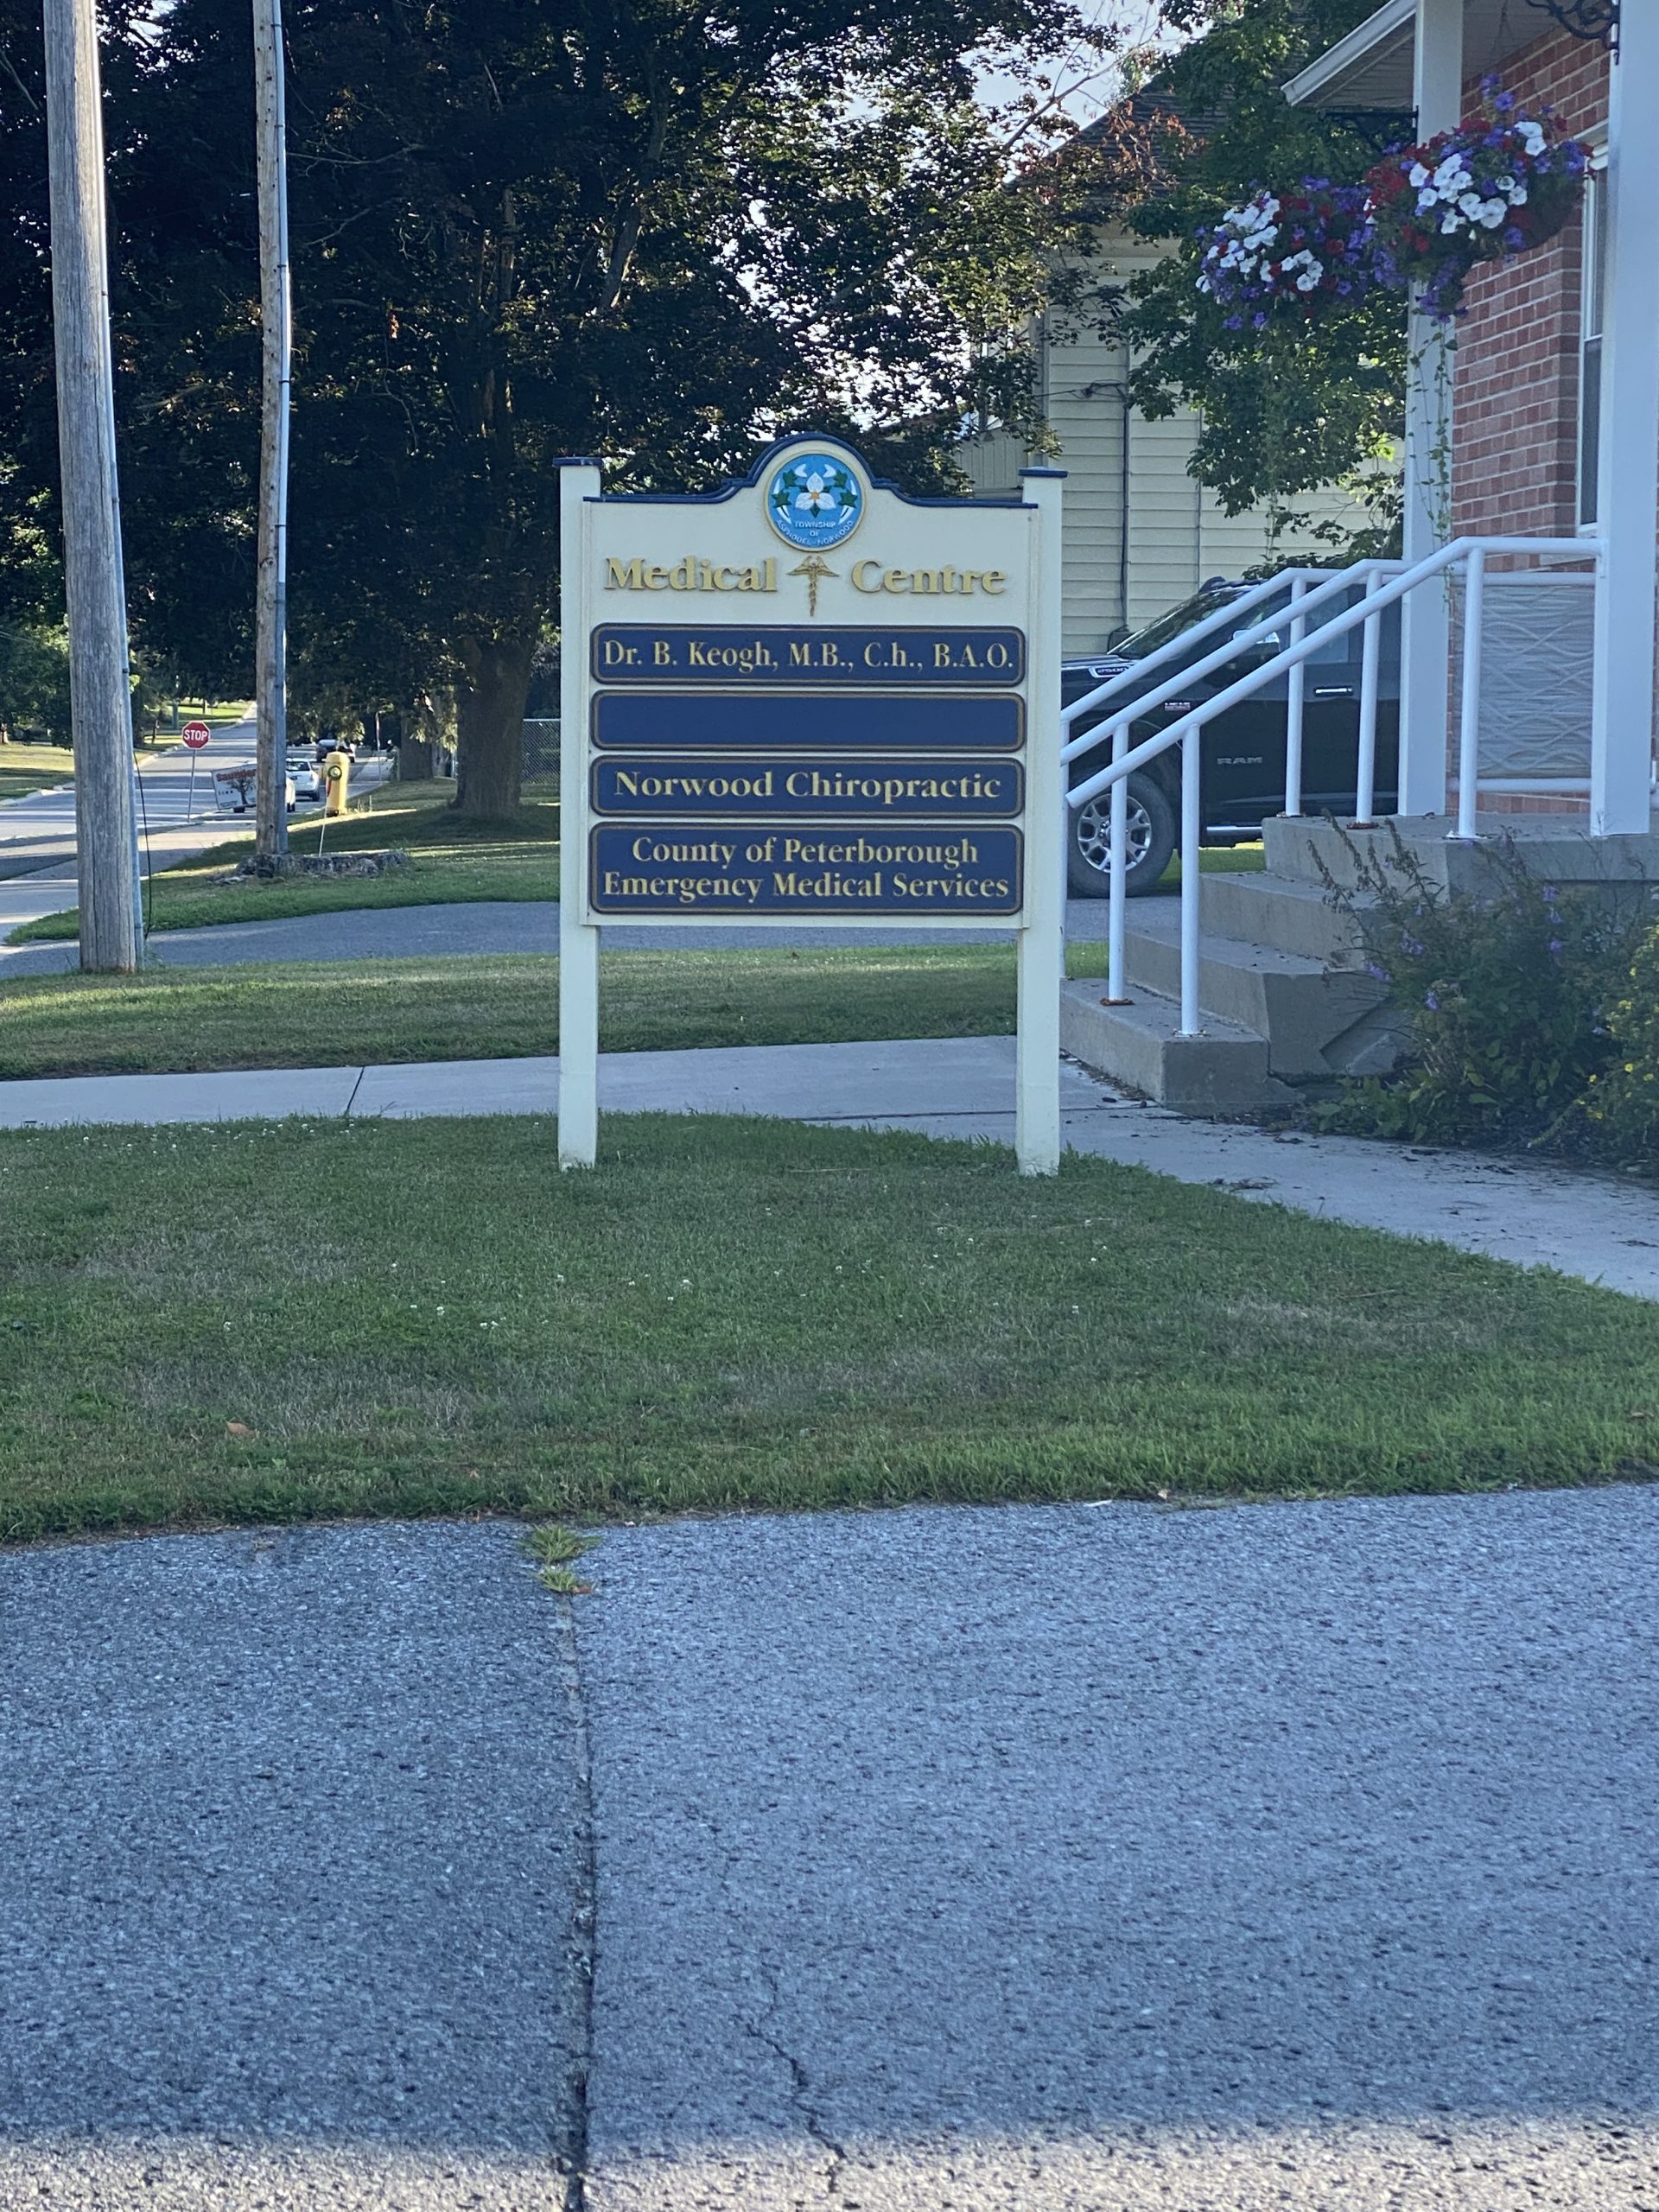 Medical Centre sign In Norwood, Ontario